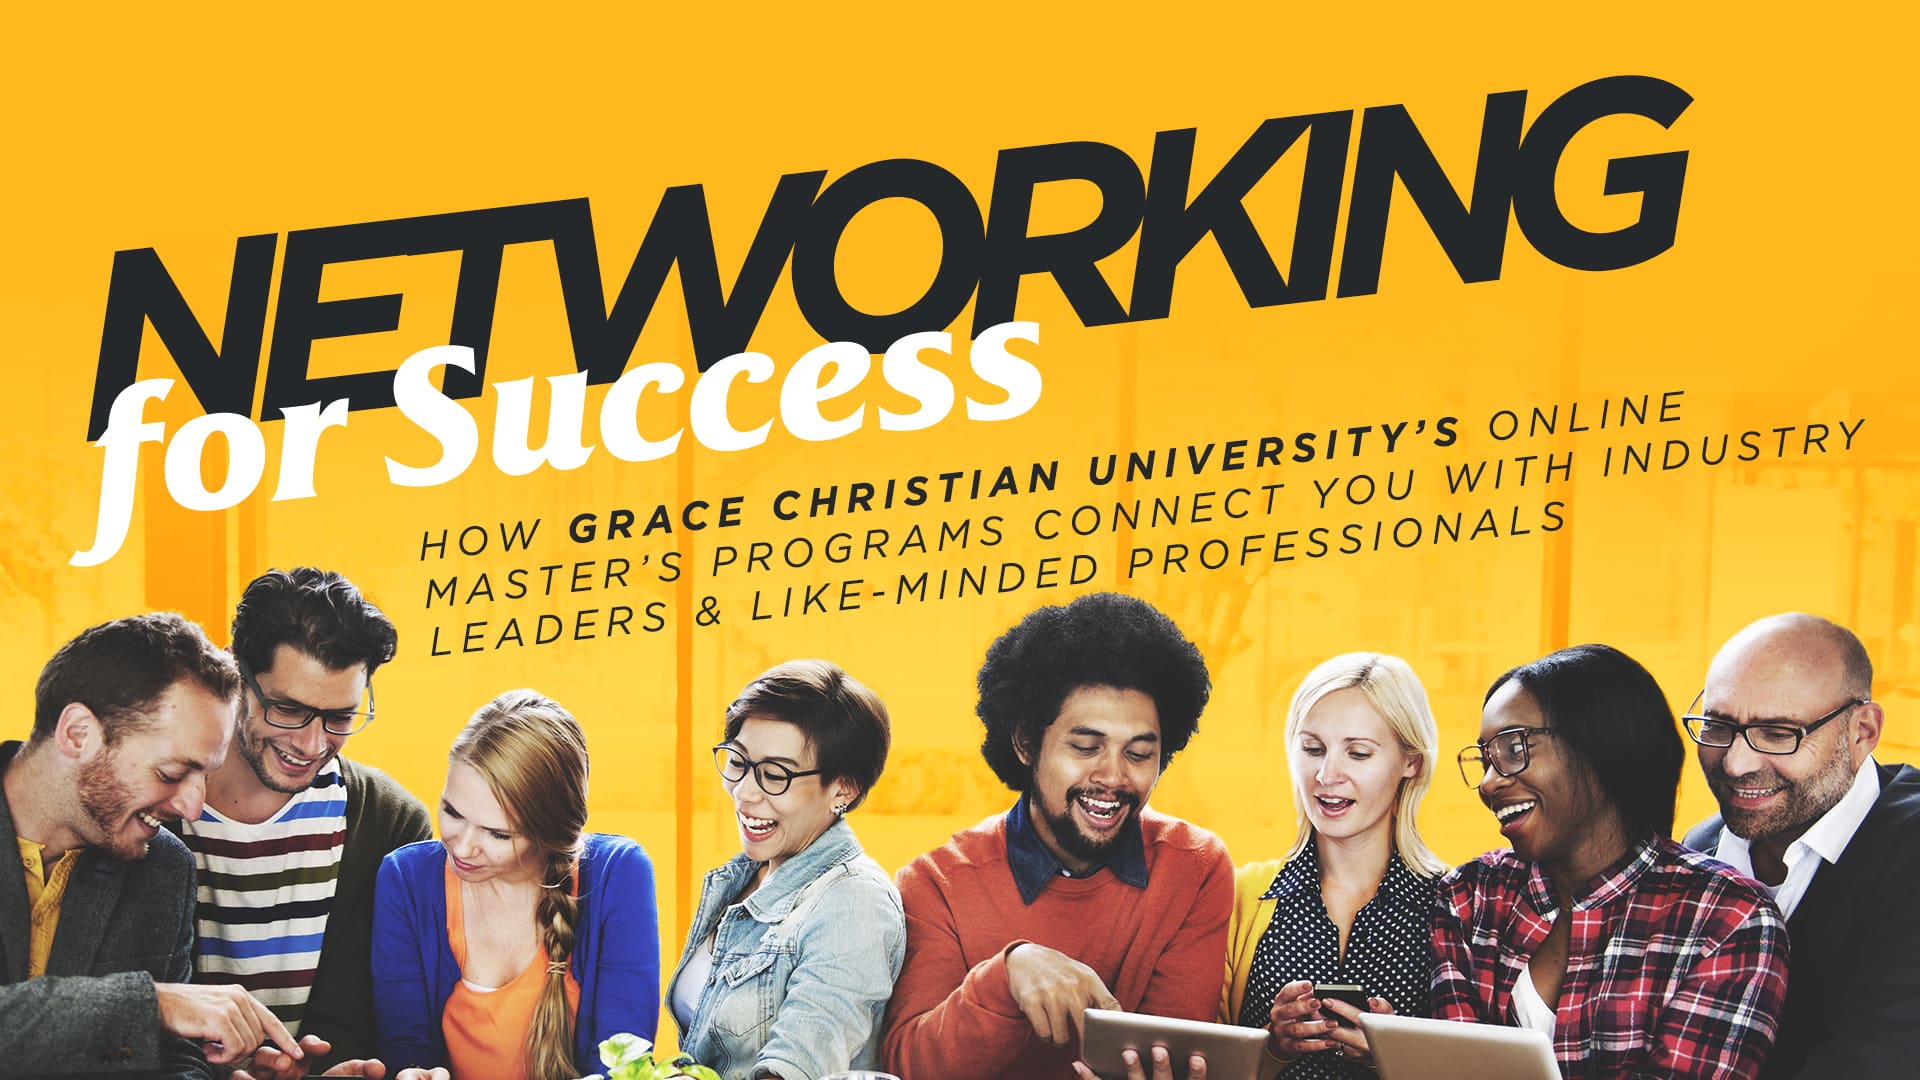 Networking for Success: How Grace Christian University’s Online Master’s Programs Connect You with Industry Leaders and Like-Minded Professionals